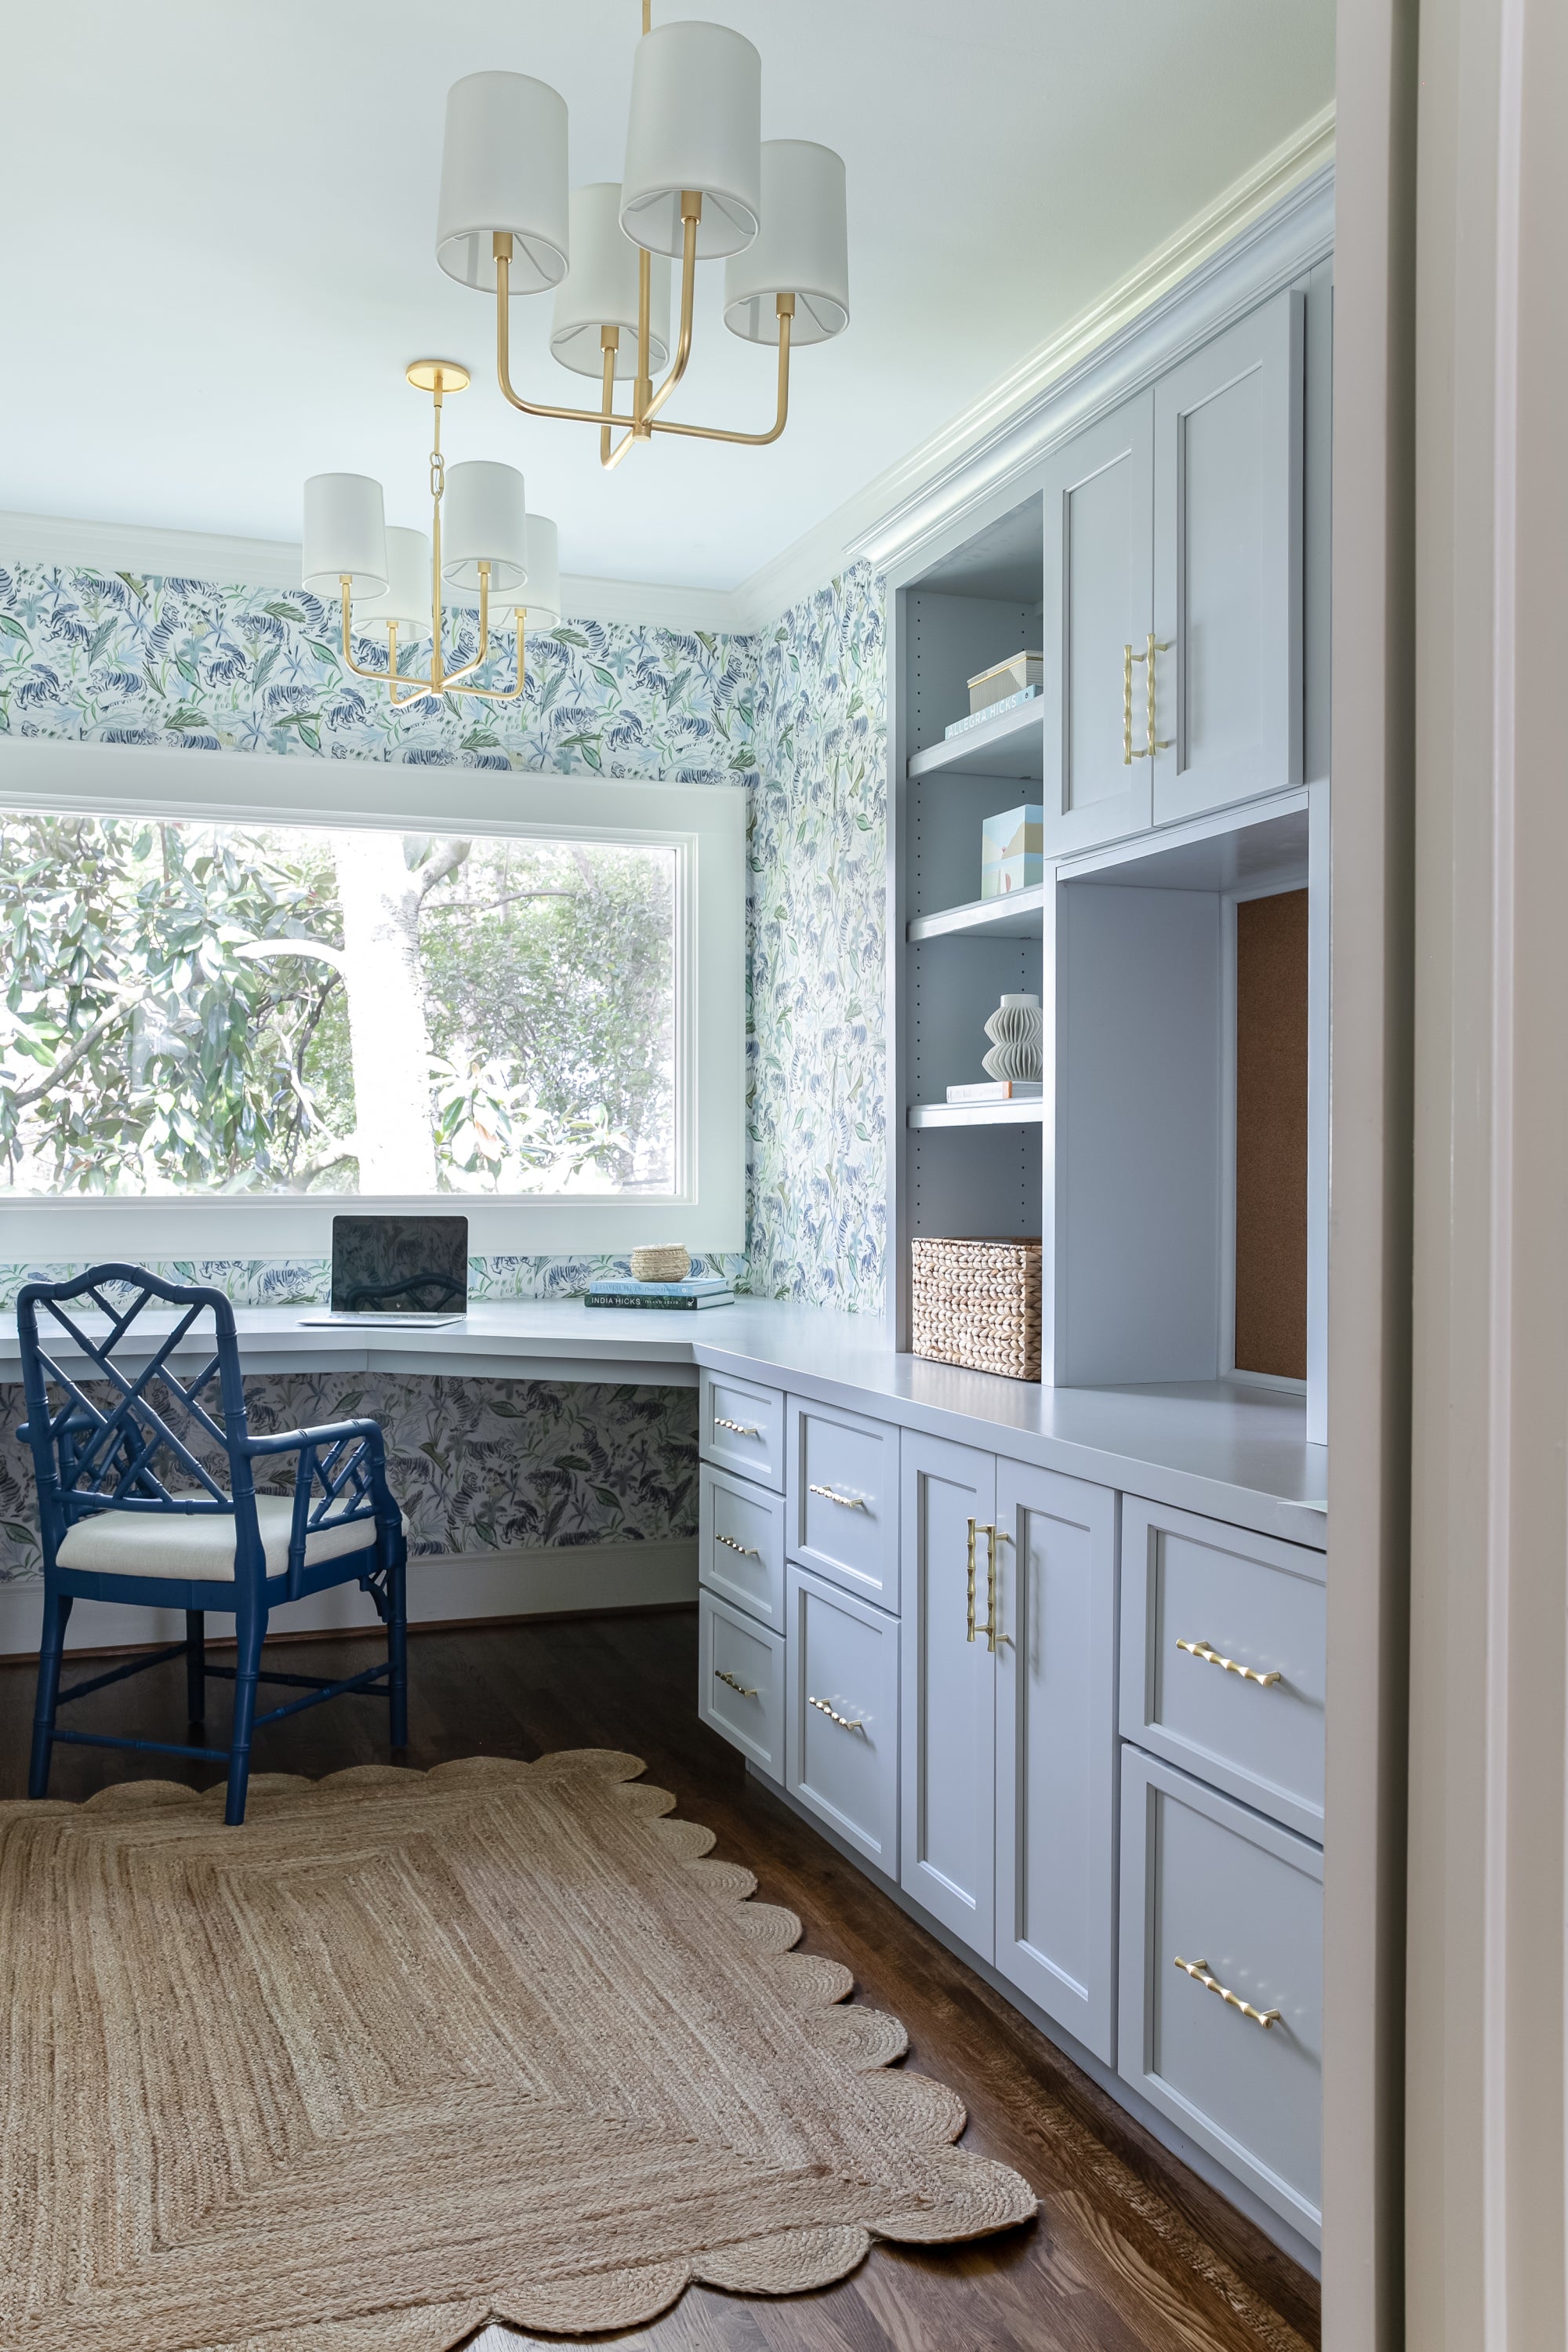 Office with green tiger chinoiserie wallpaper and light blue painted cabinets and shelves with a large picture window looking outside